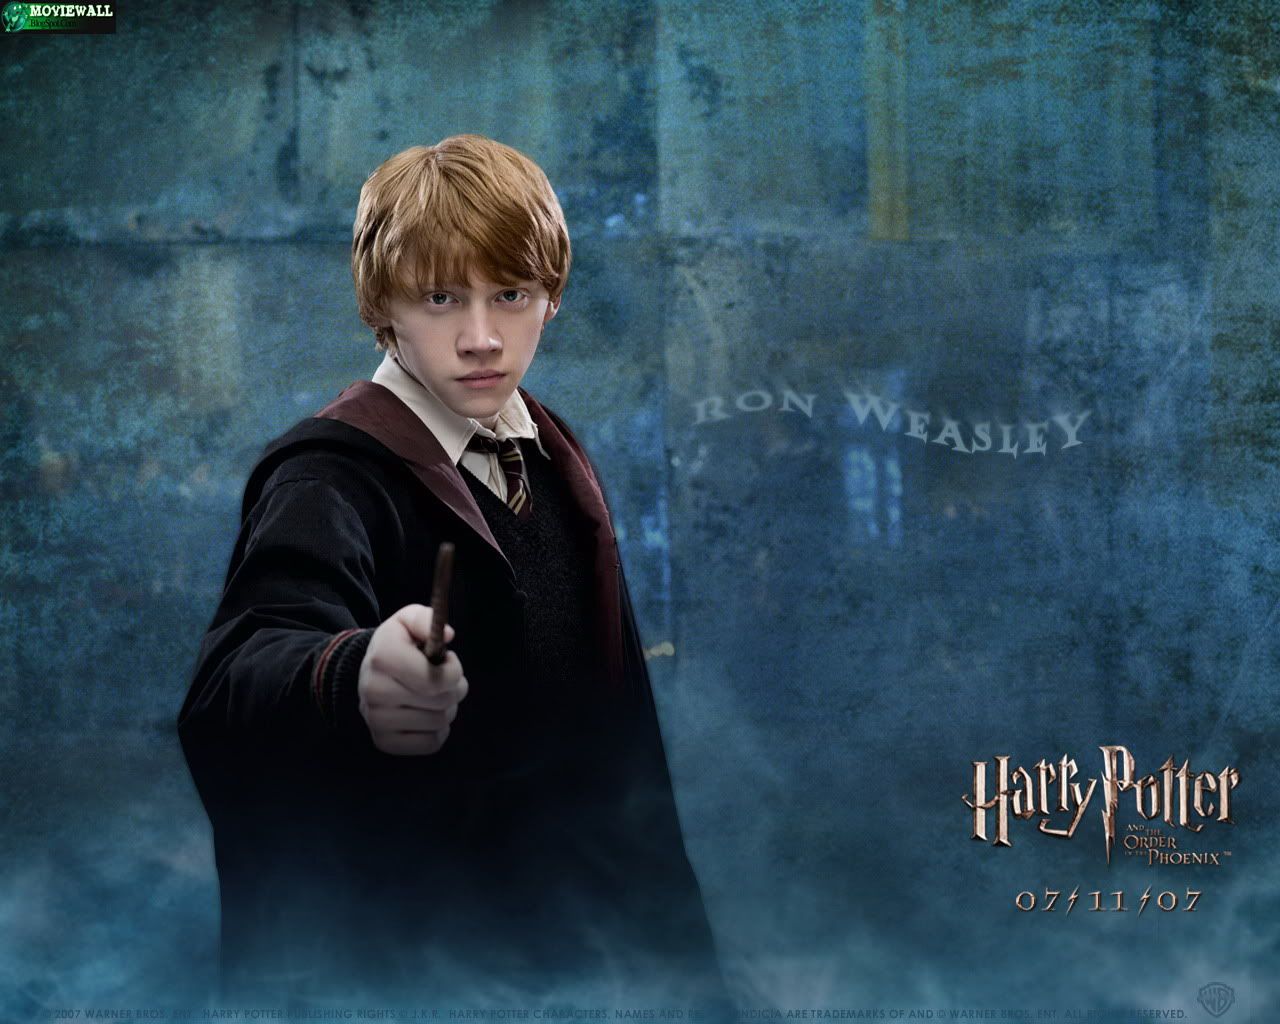 Moviewall - Movie Posters, Wallpapers & Trailers.: Harry Potter and the Order of the ...1280 x 1024